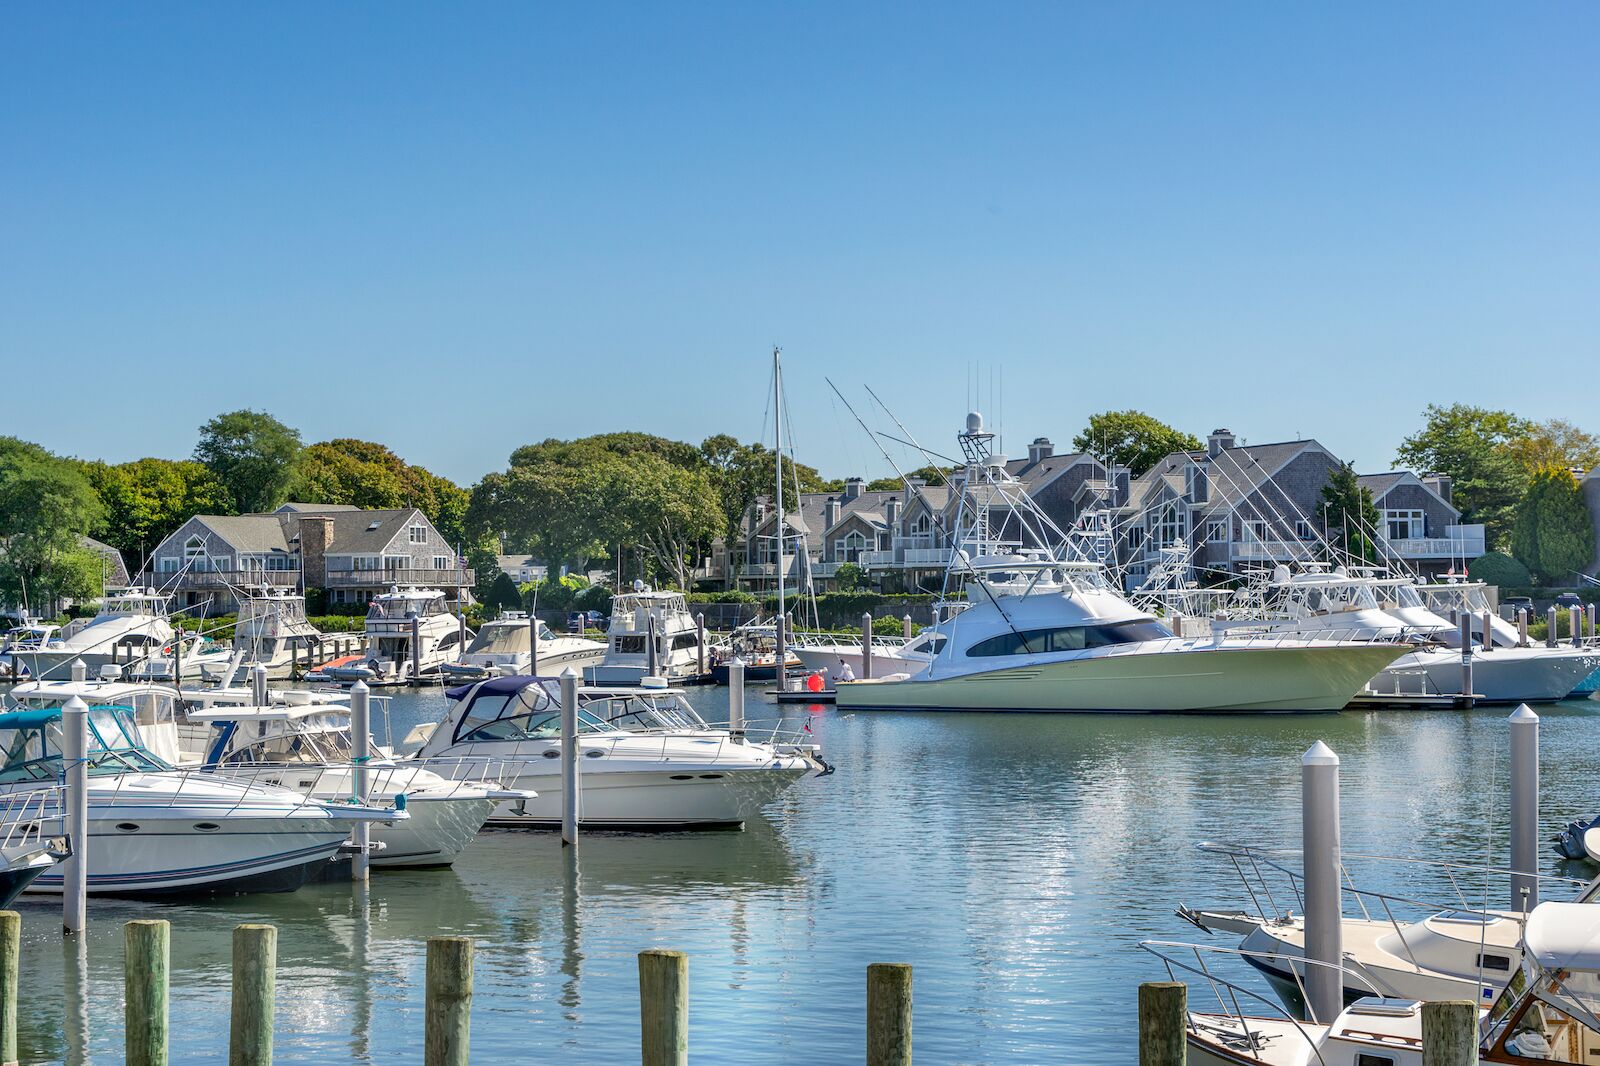 The Cape Cod town of Falmouth and its marina